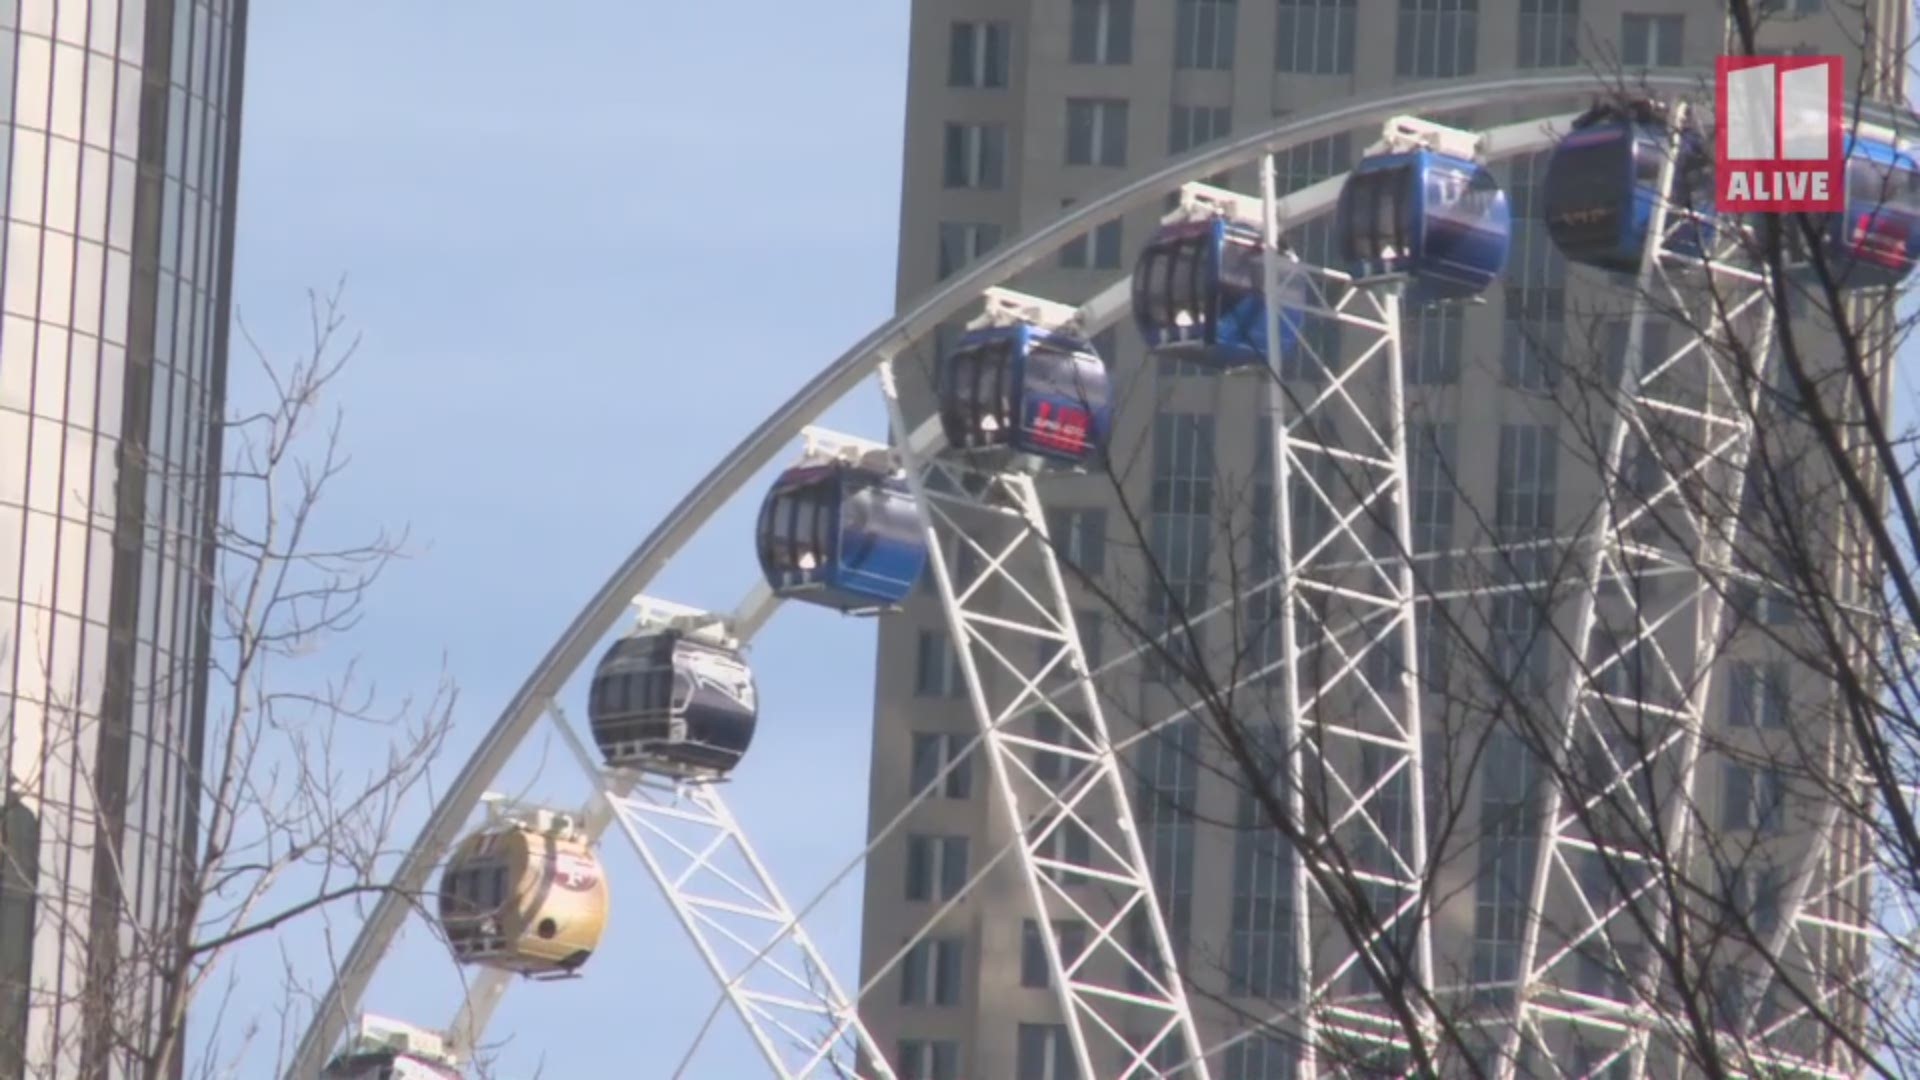 Just for Super Bowl Week, the gondola cars at SkyView Atlanta are decked out to look like NFL helmets!